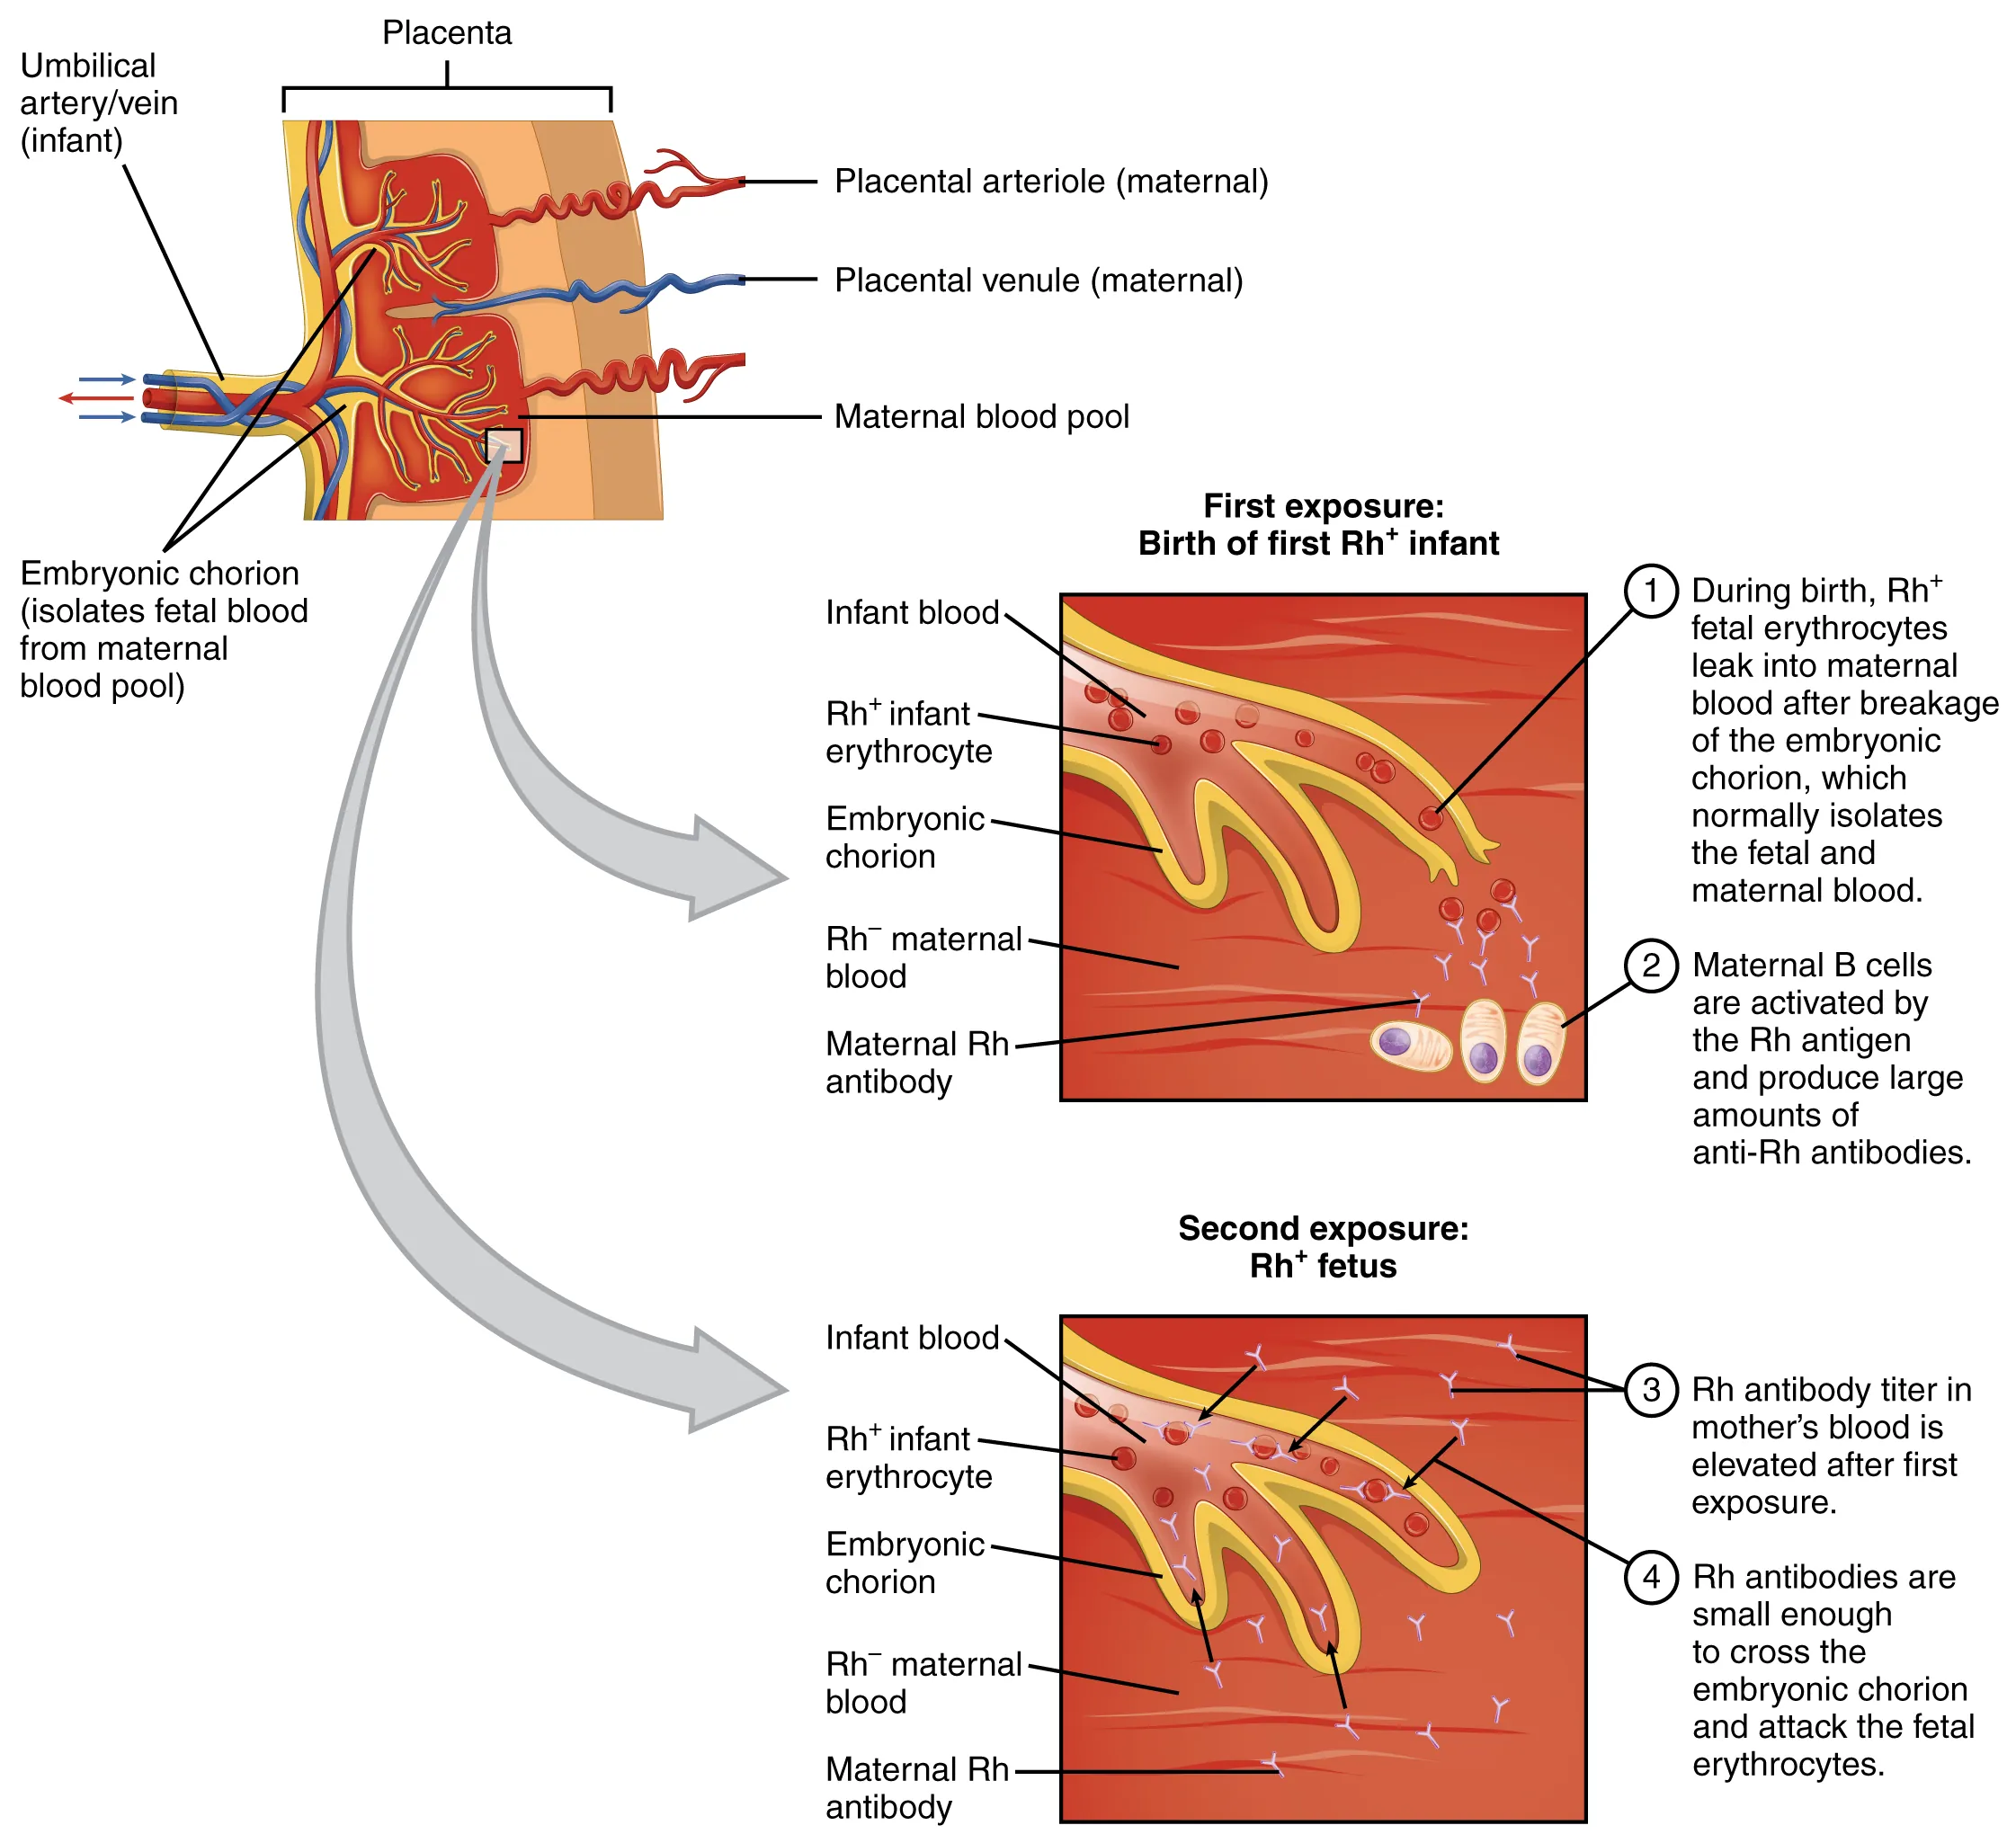 This figure shows an umbilical artery and vein passing through the placenta on the top left. The top right panel shows the first exposure to Rh+ antibodies in the mother. The bottom right panel shows the response when the second exposure in the form of another fetus takes place. Textboxes detail the steps in each process.